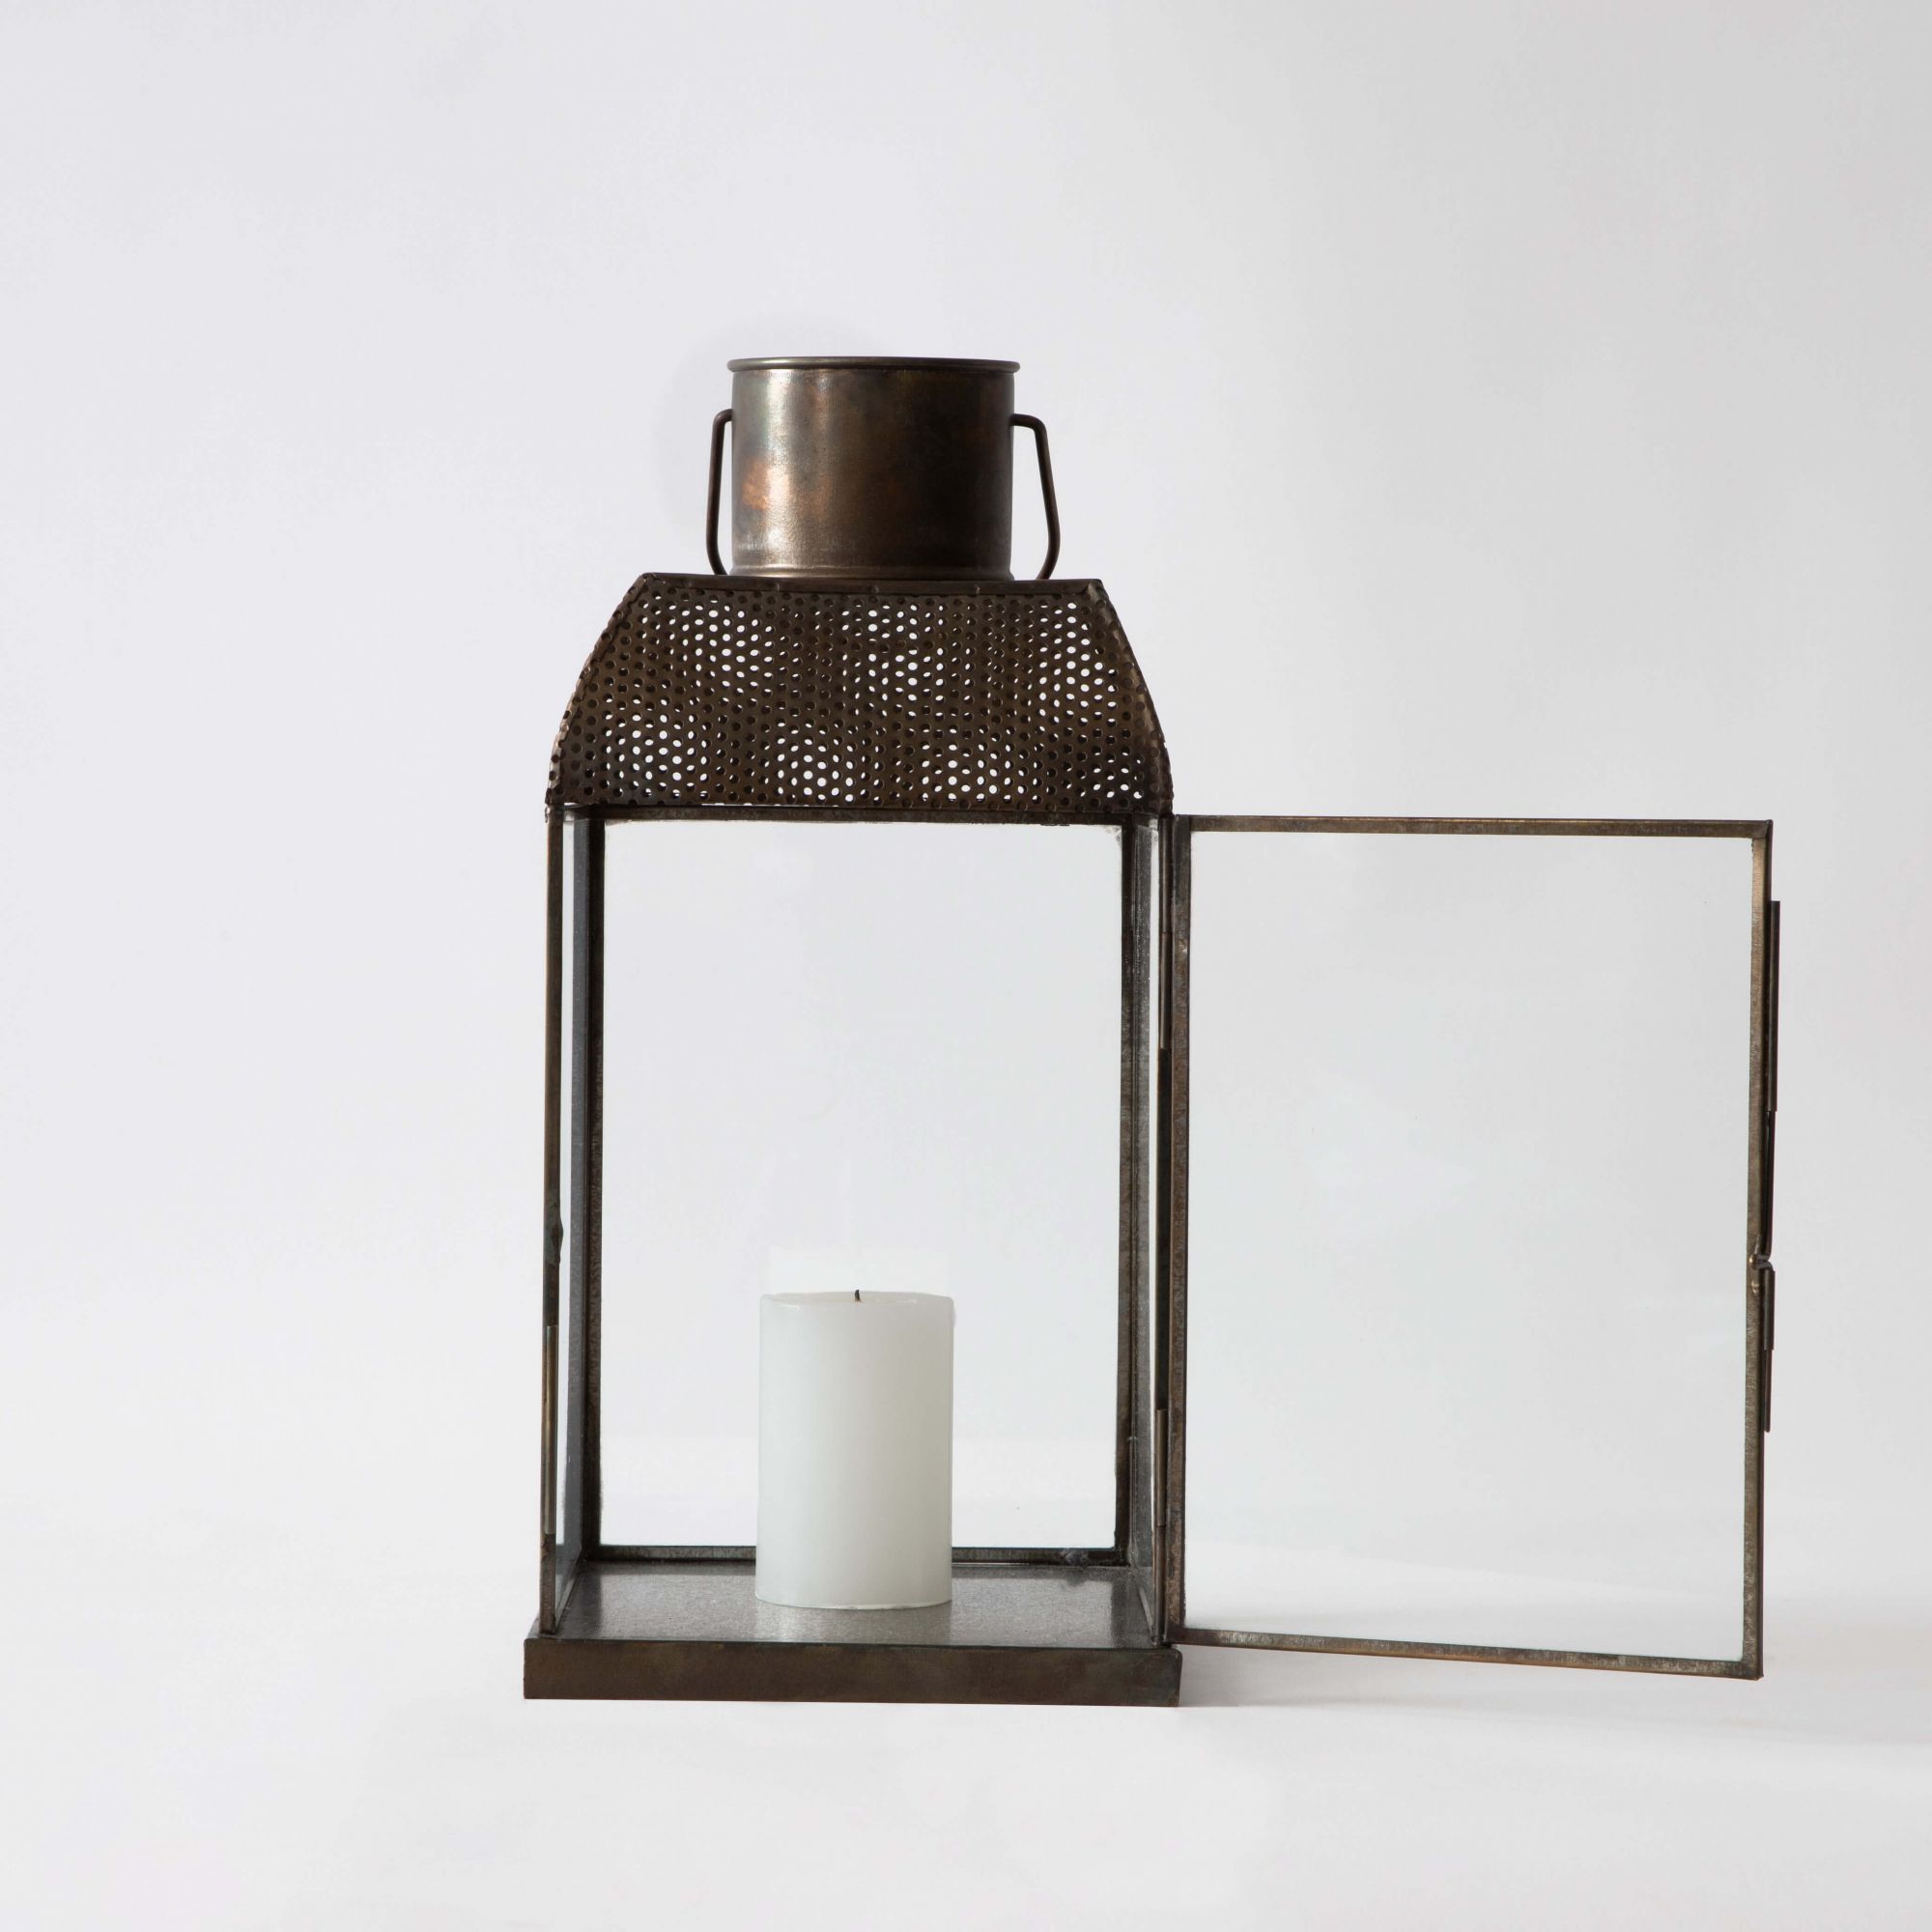 Norman Mesh Lantern Glass Candle Holder - Aged Antique Finish